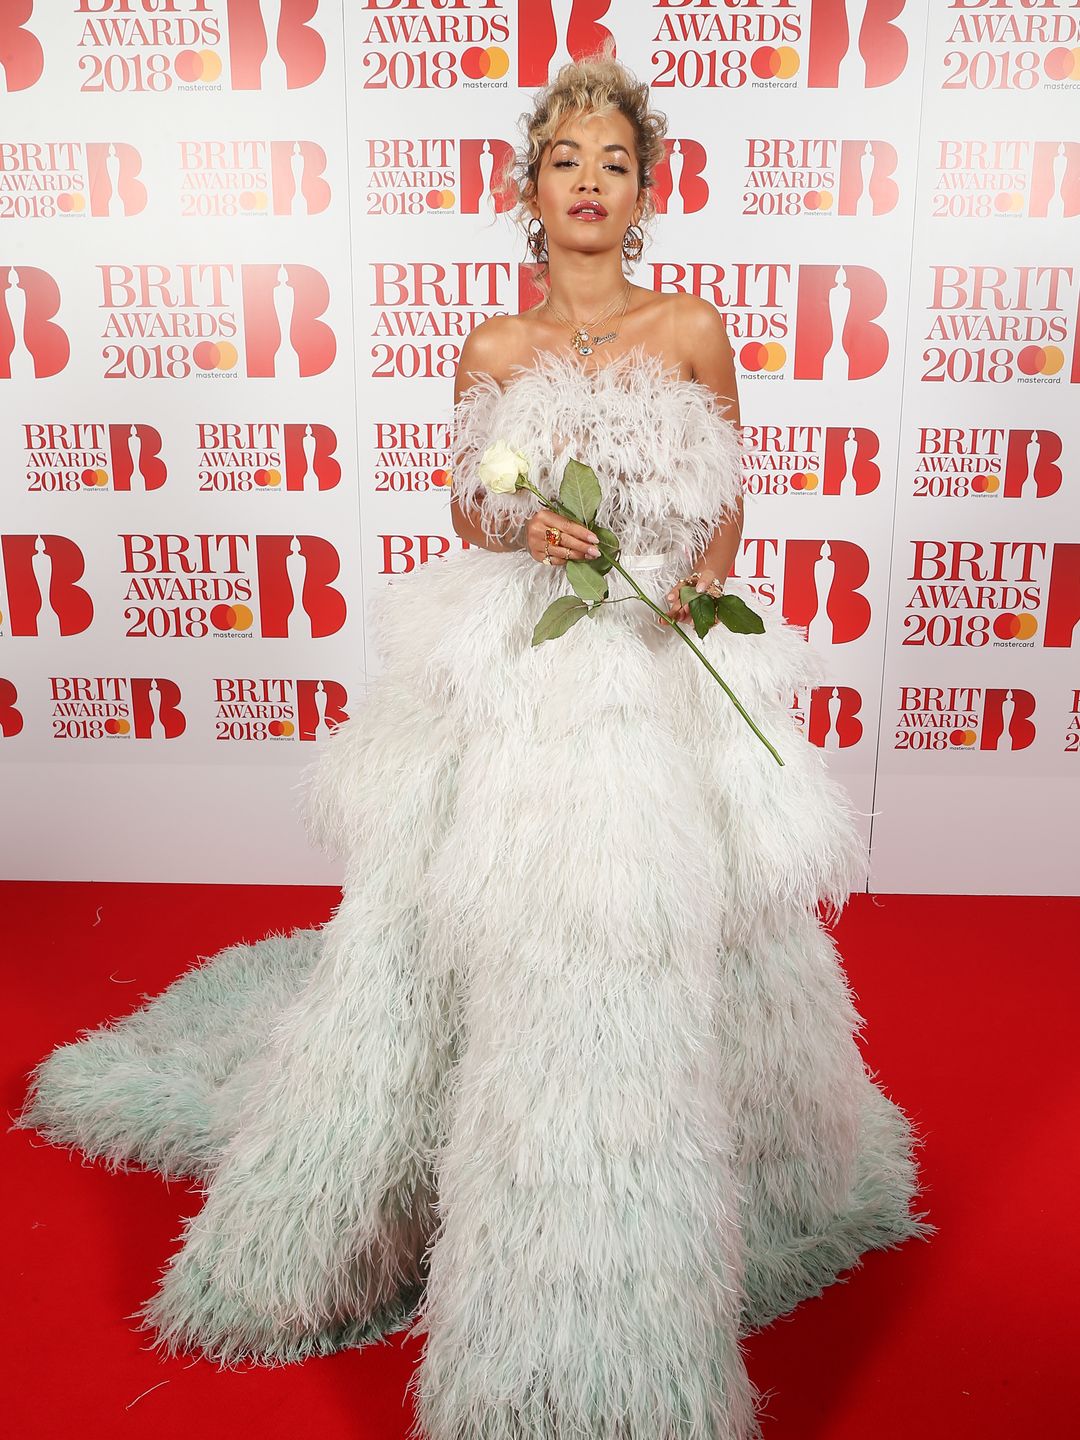 Rita Ora attends The BRIT Awards 2018 Red Carpet in a feather gown